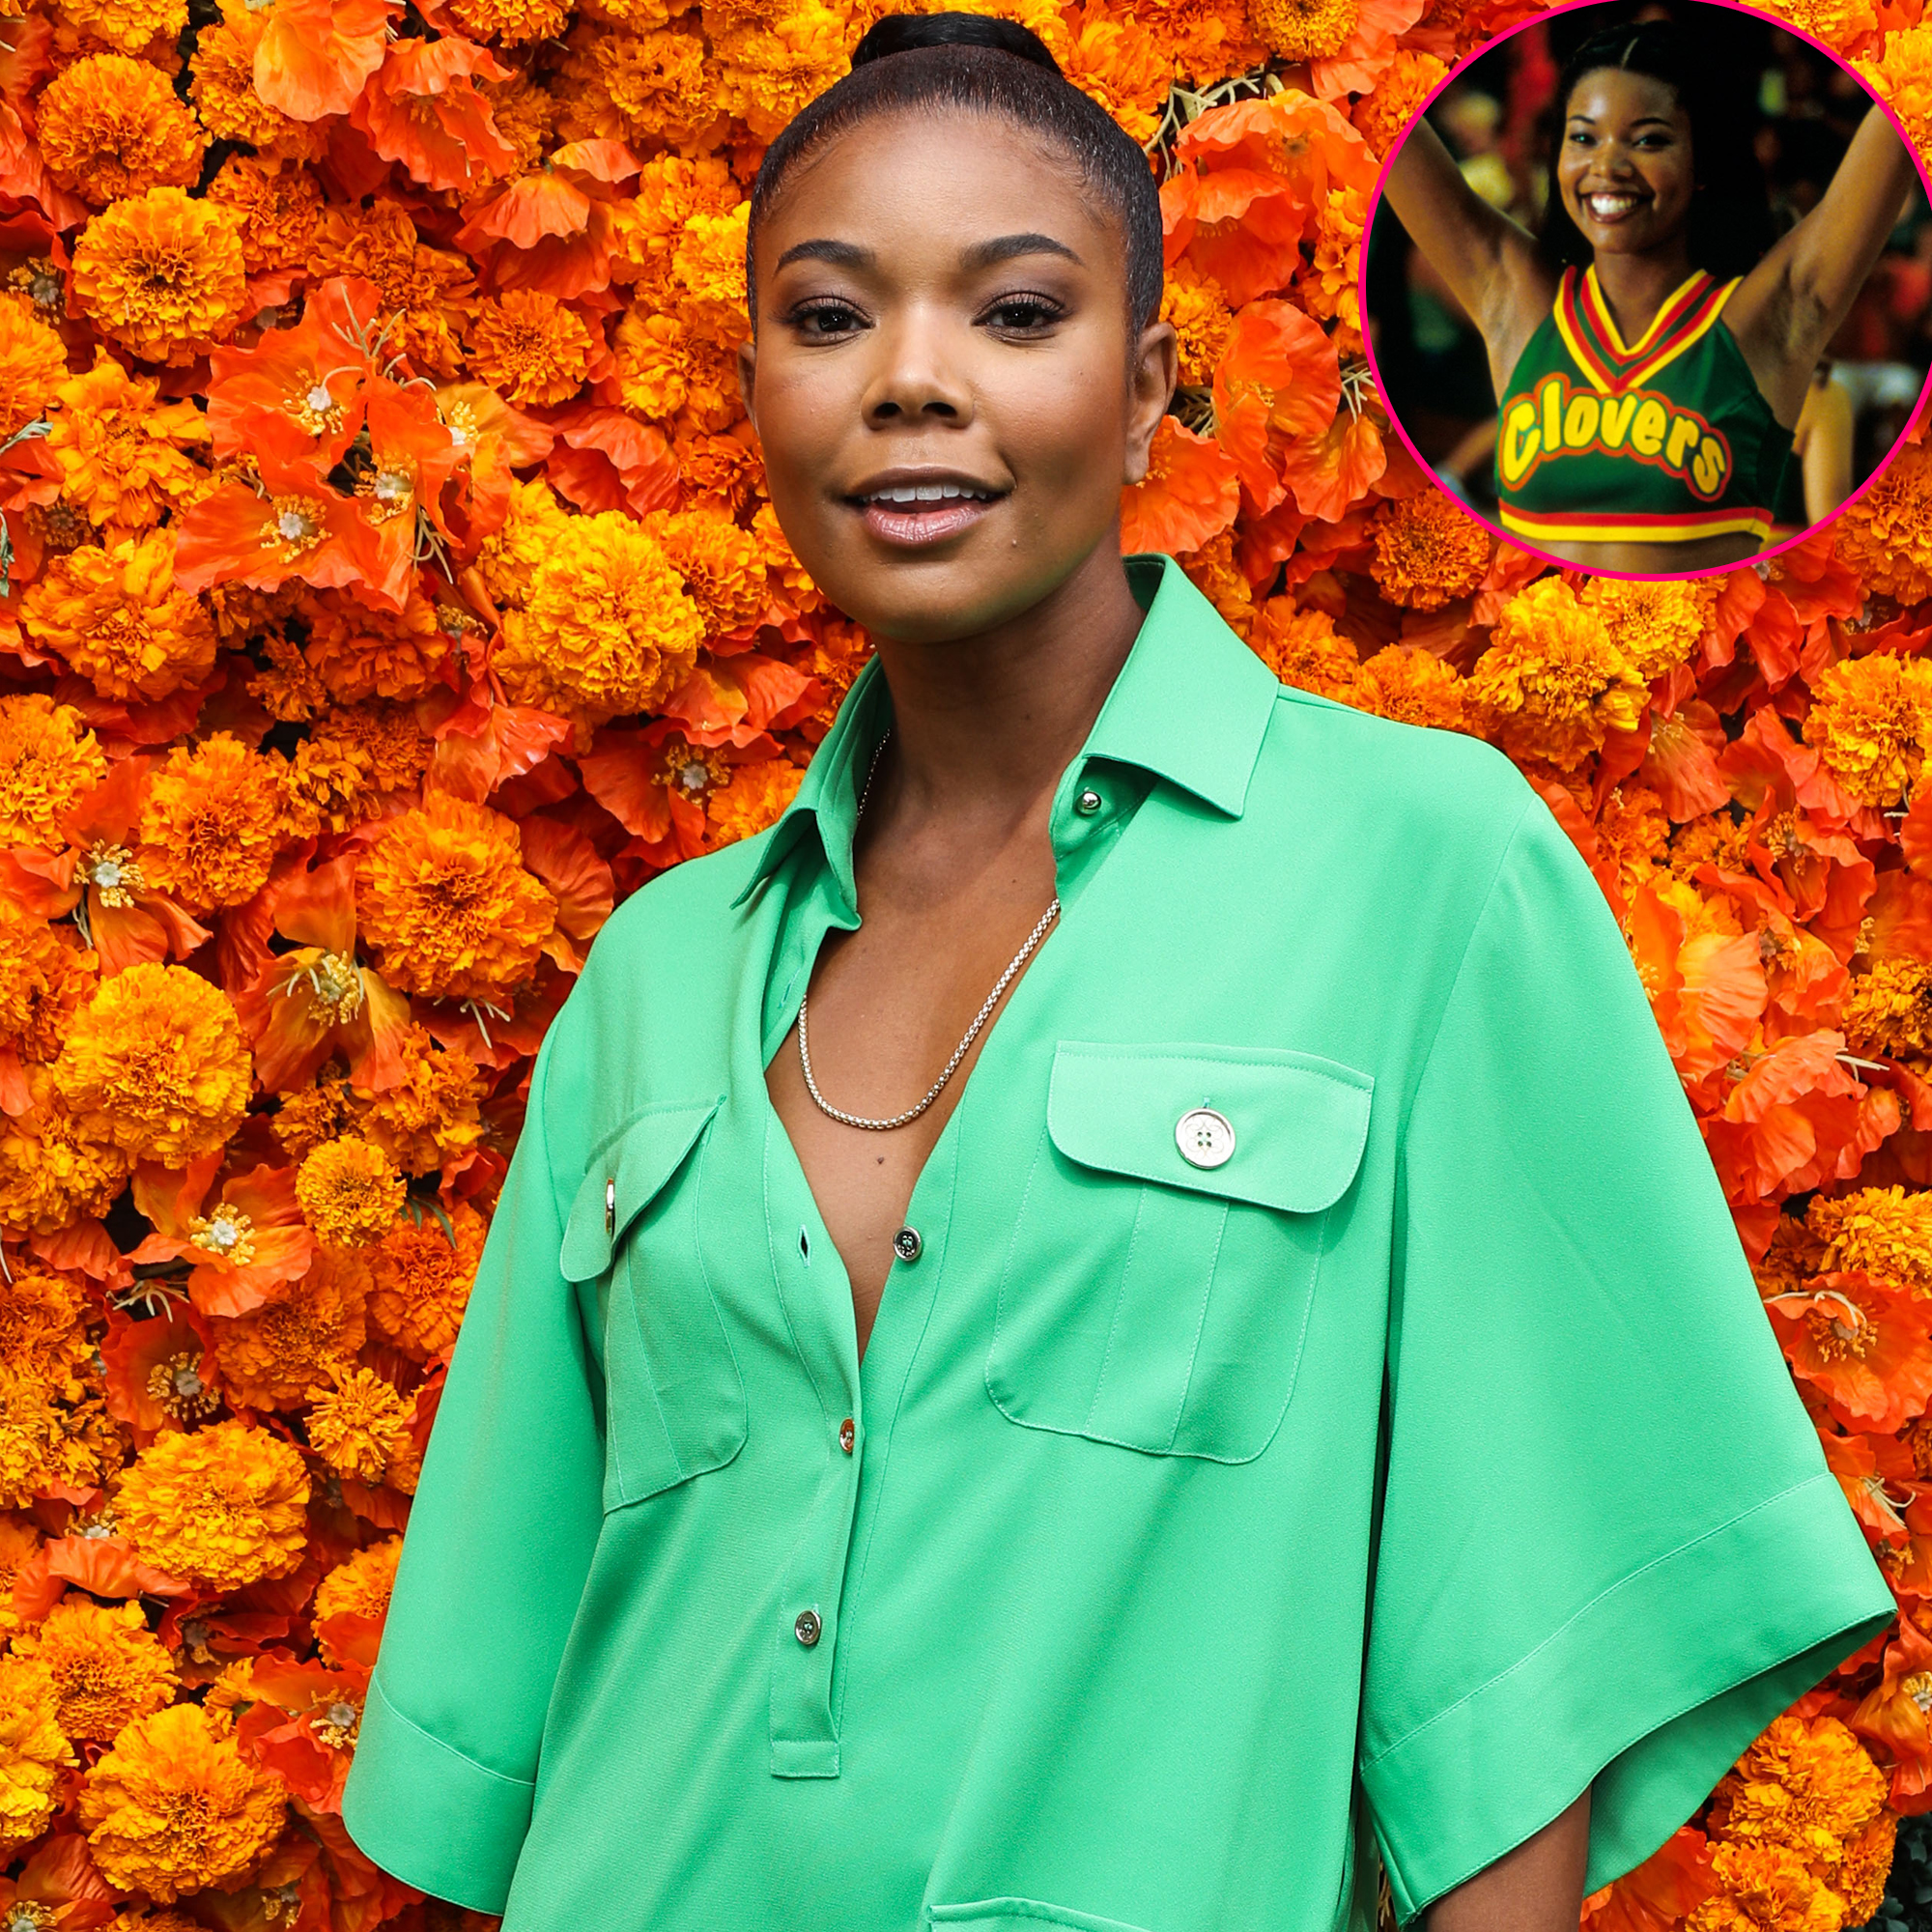 Gabrielle Union Filmed Extra Bring It On Scenes Before Release